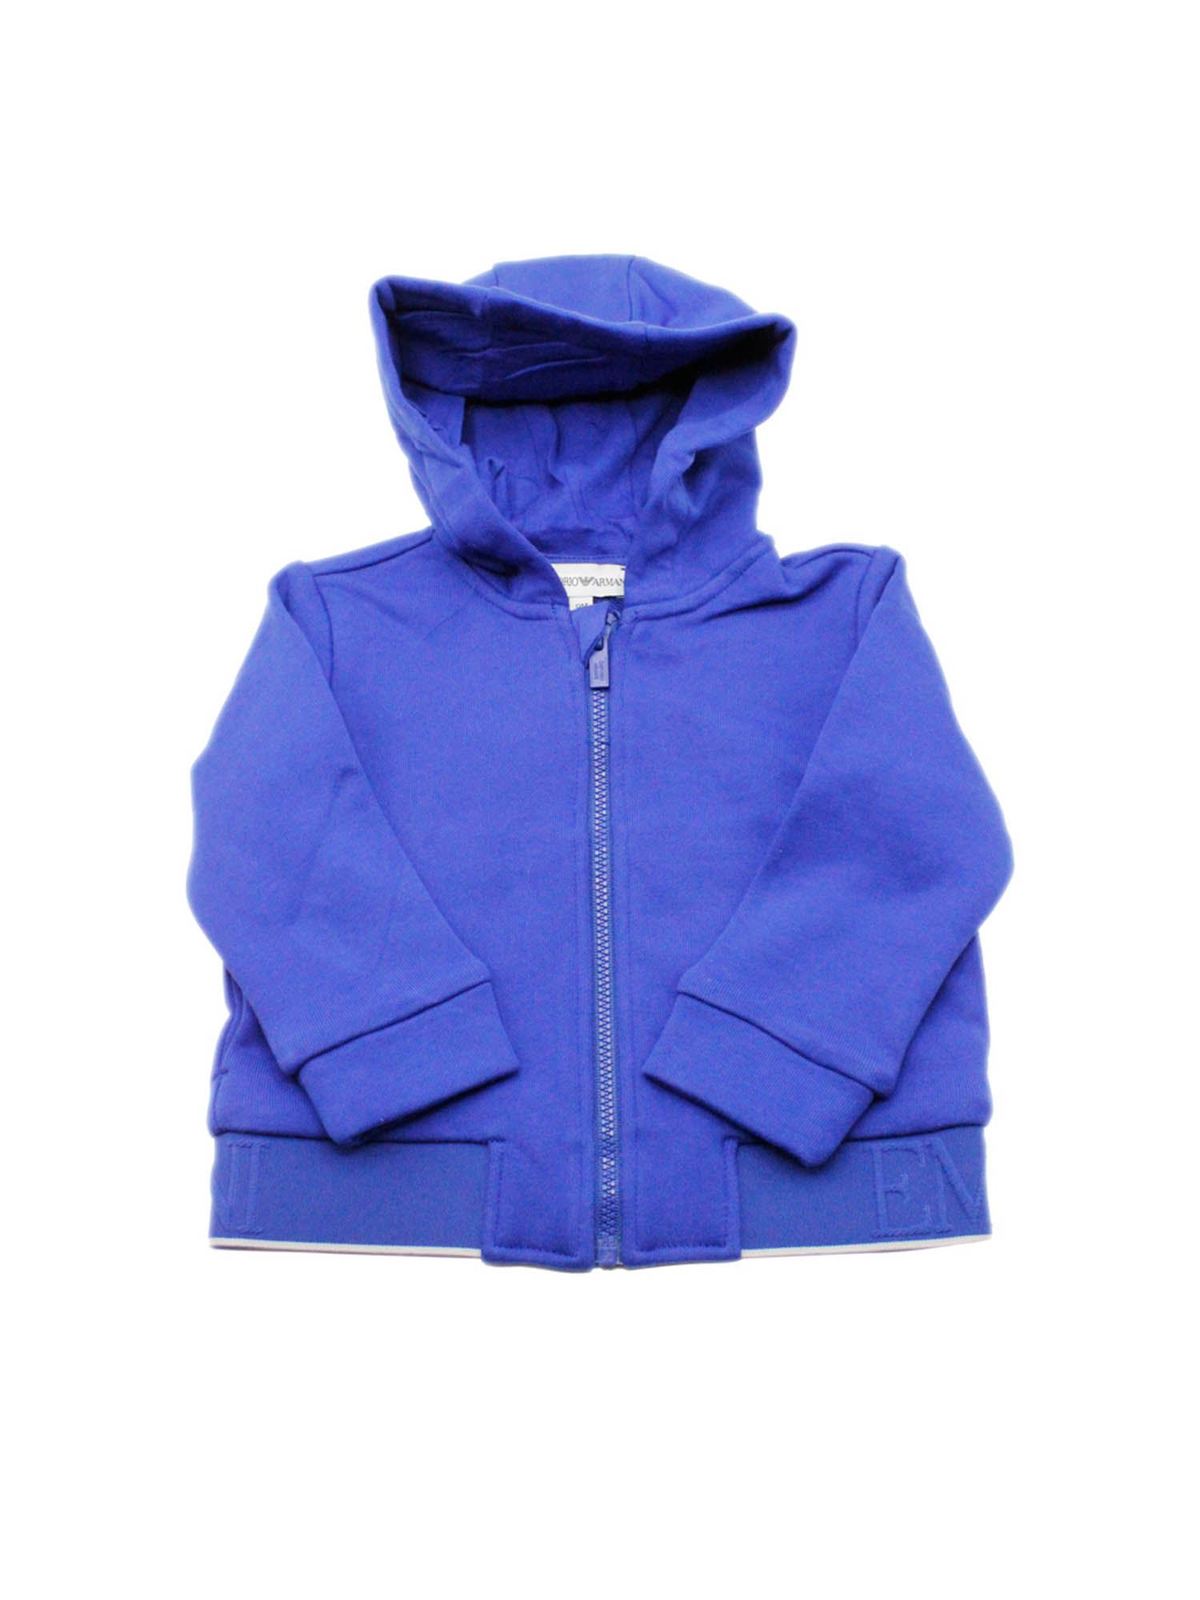 EMPORIO ARMANI HOODIE IN ELECTRIC BLUE